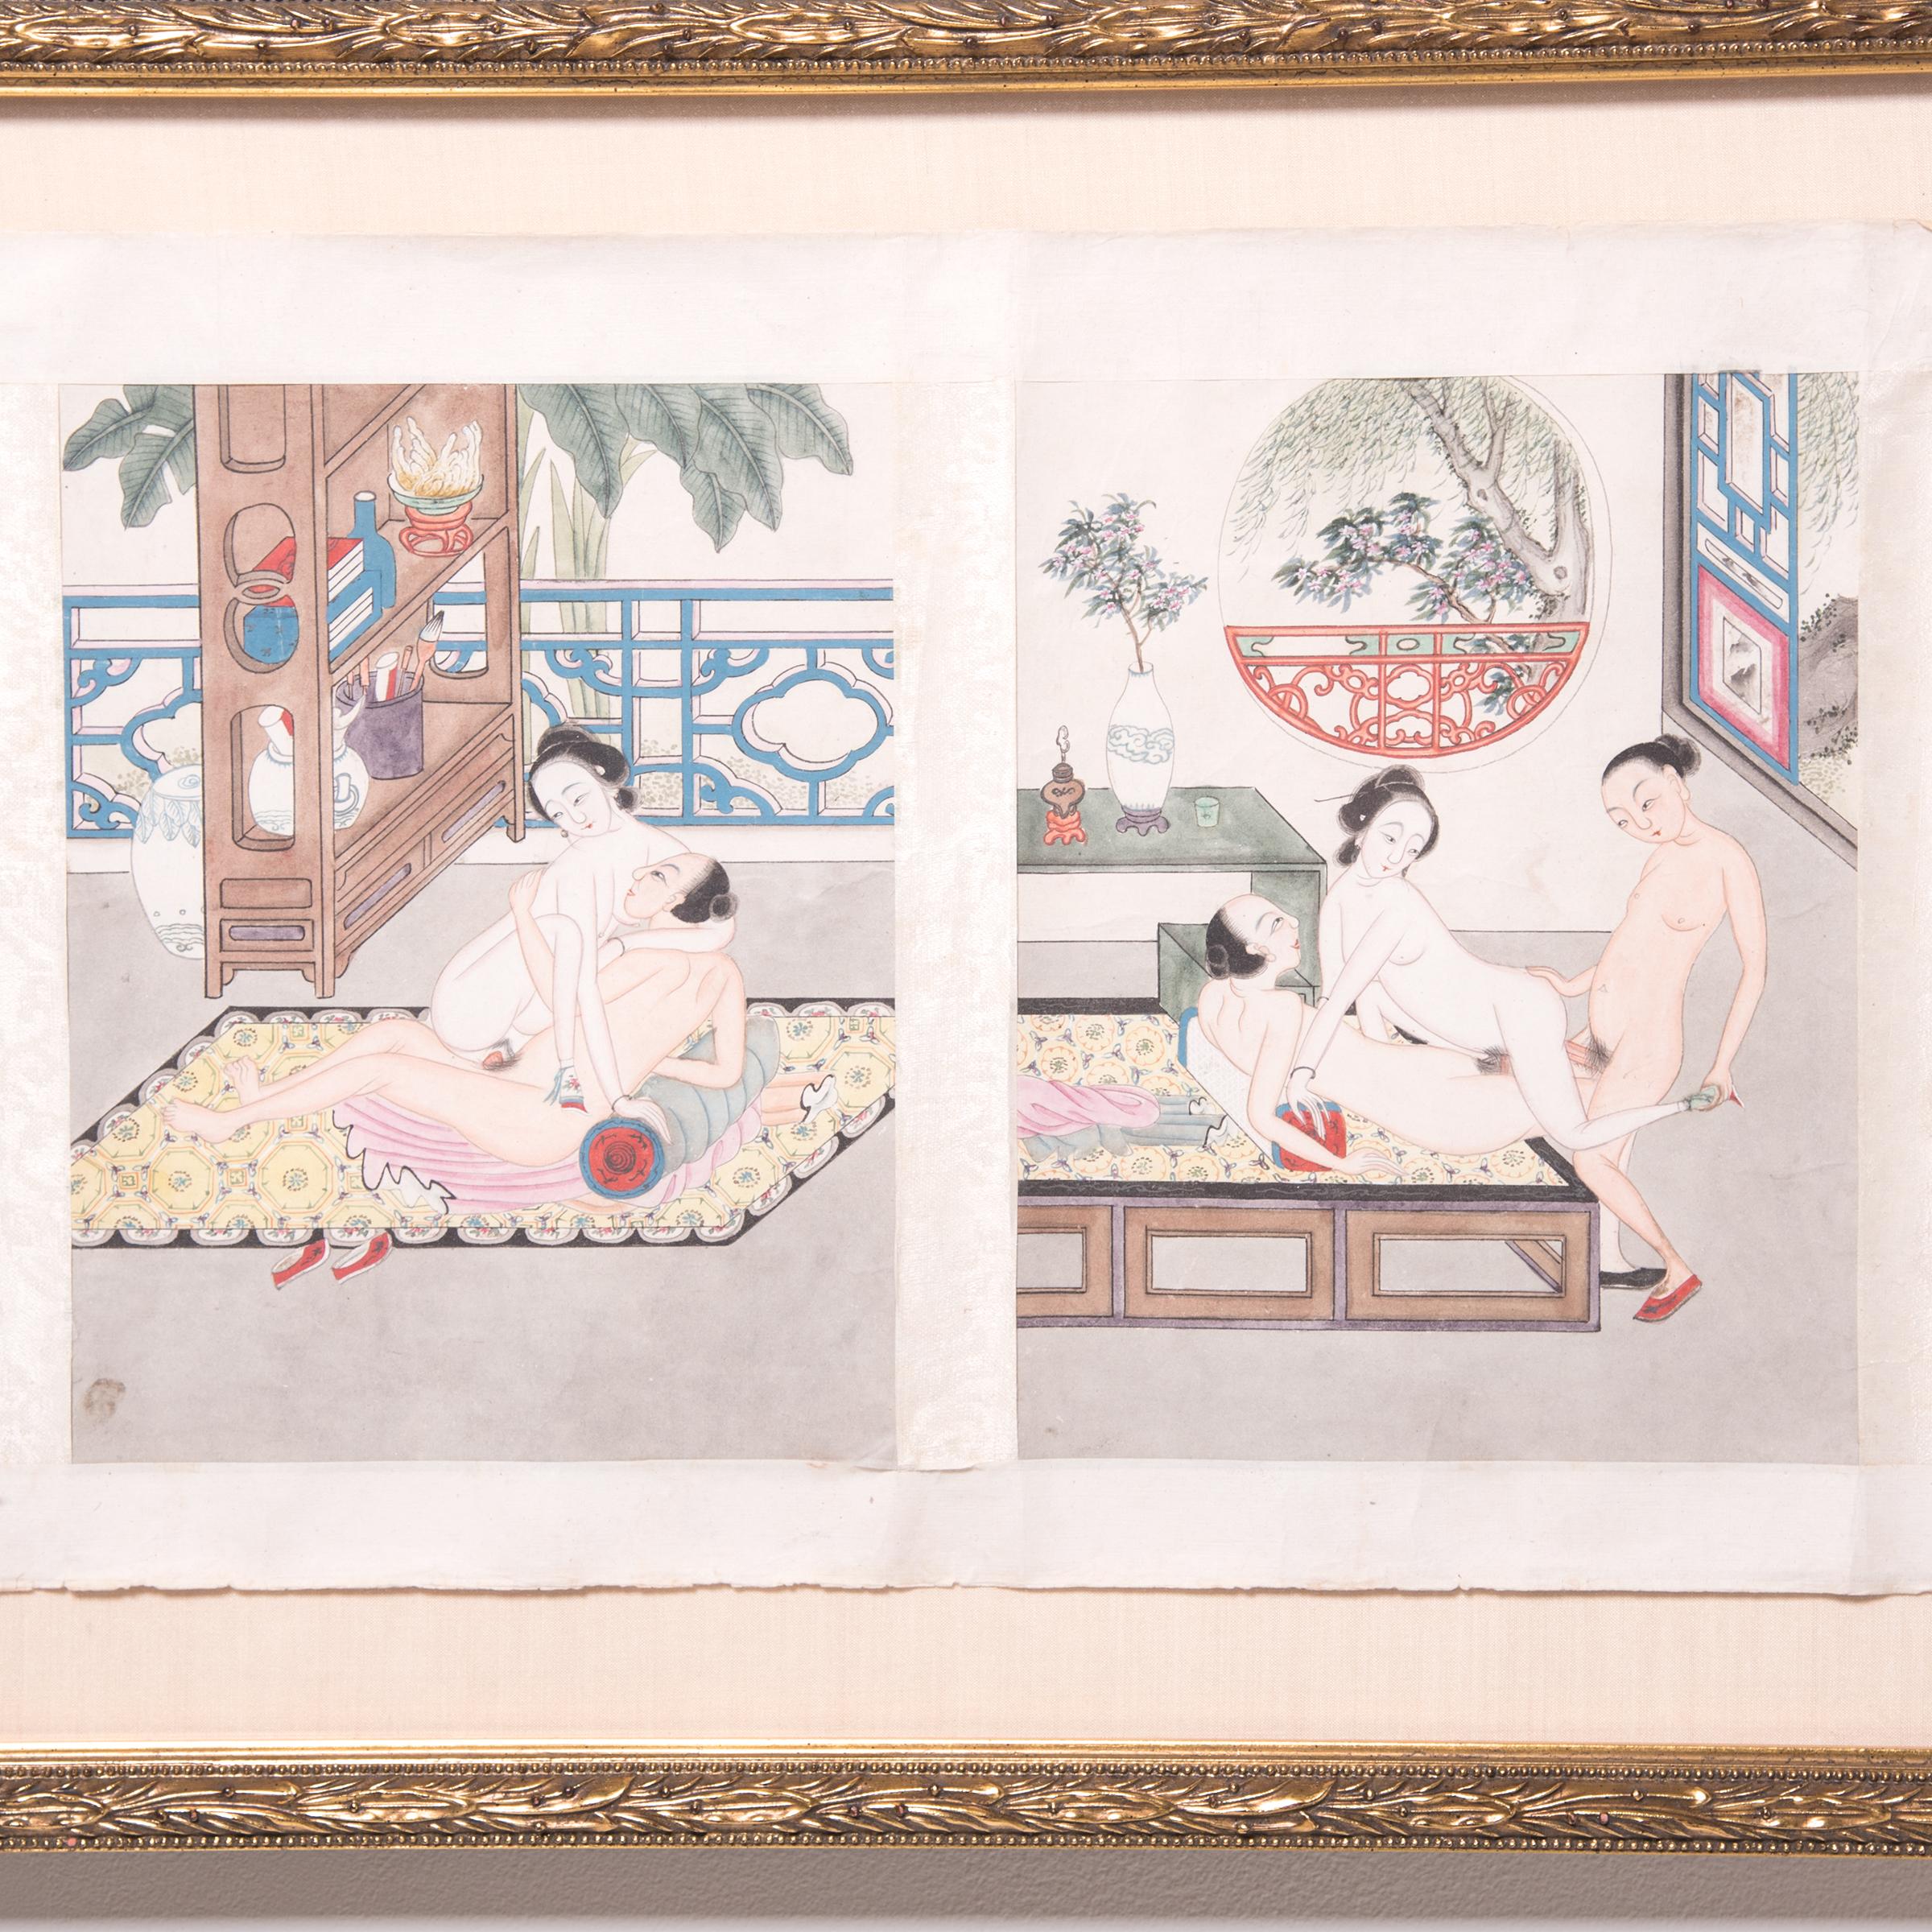 Chinese Erotic Pillow Book Scroll, c. 1850 - Beige Interior Art by Unknown